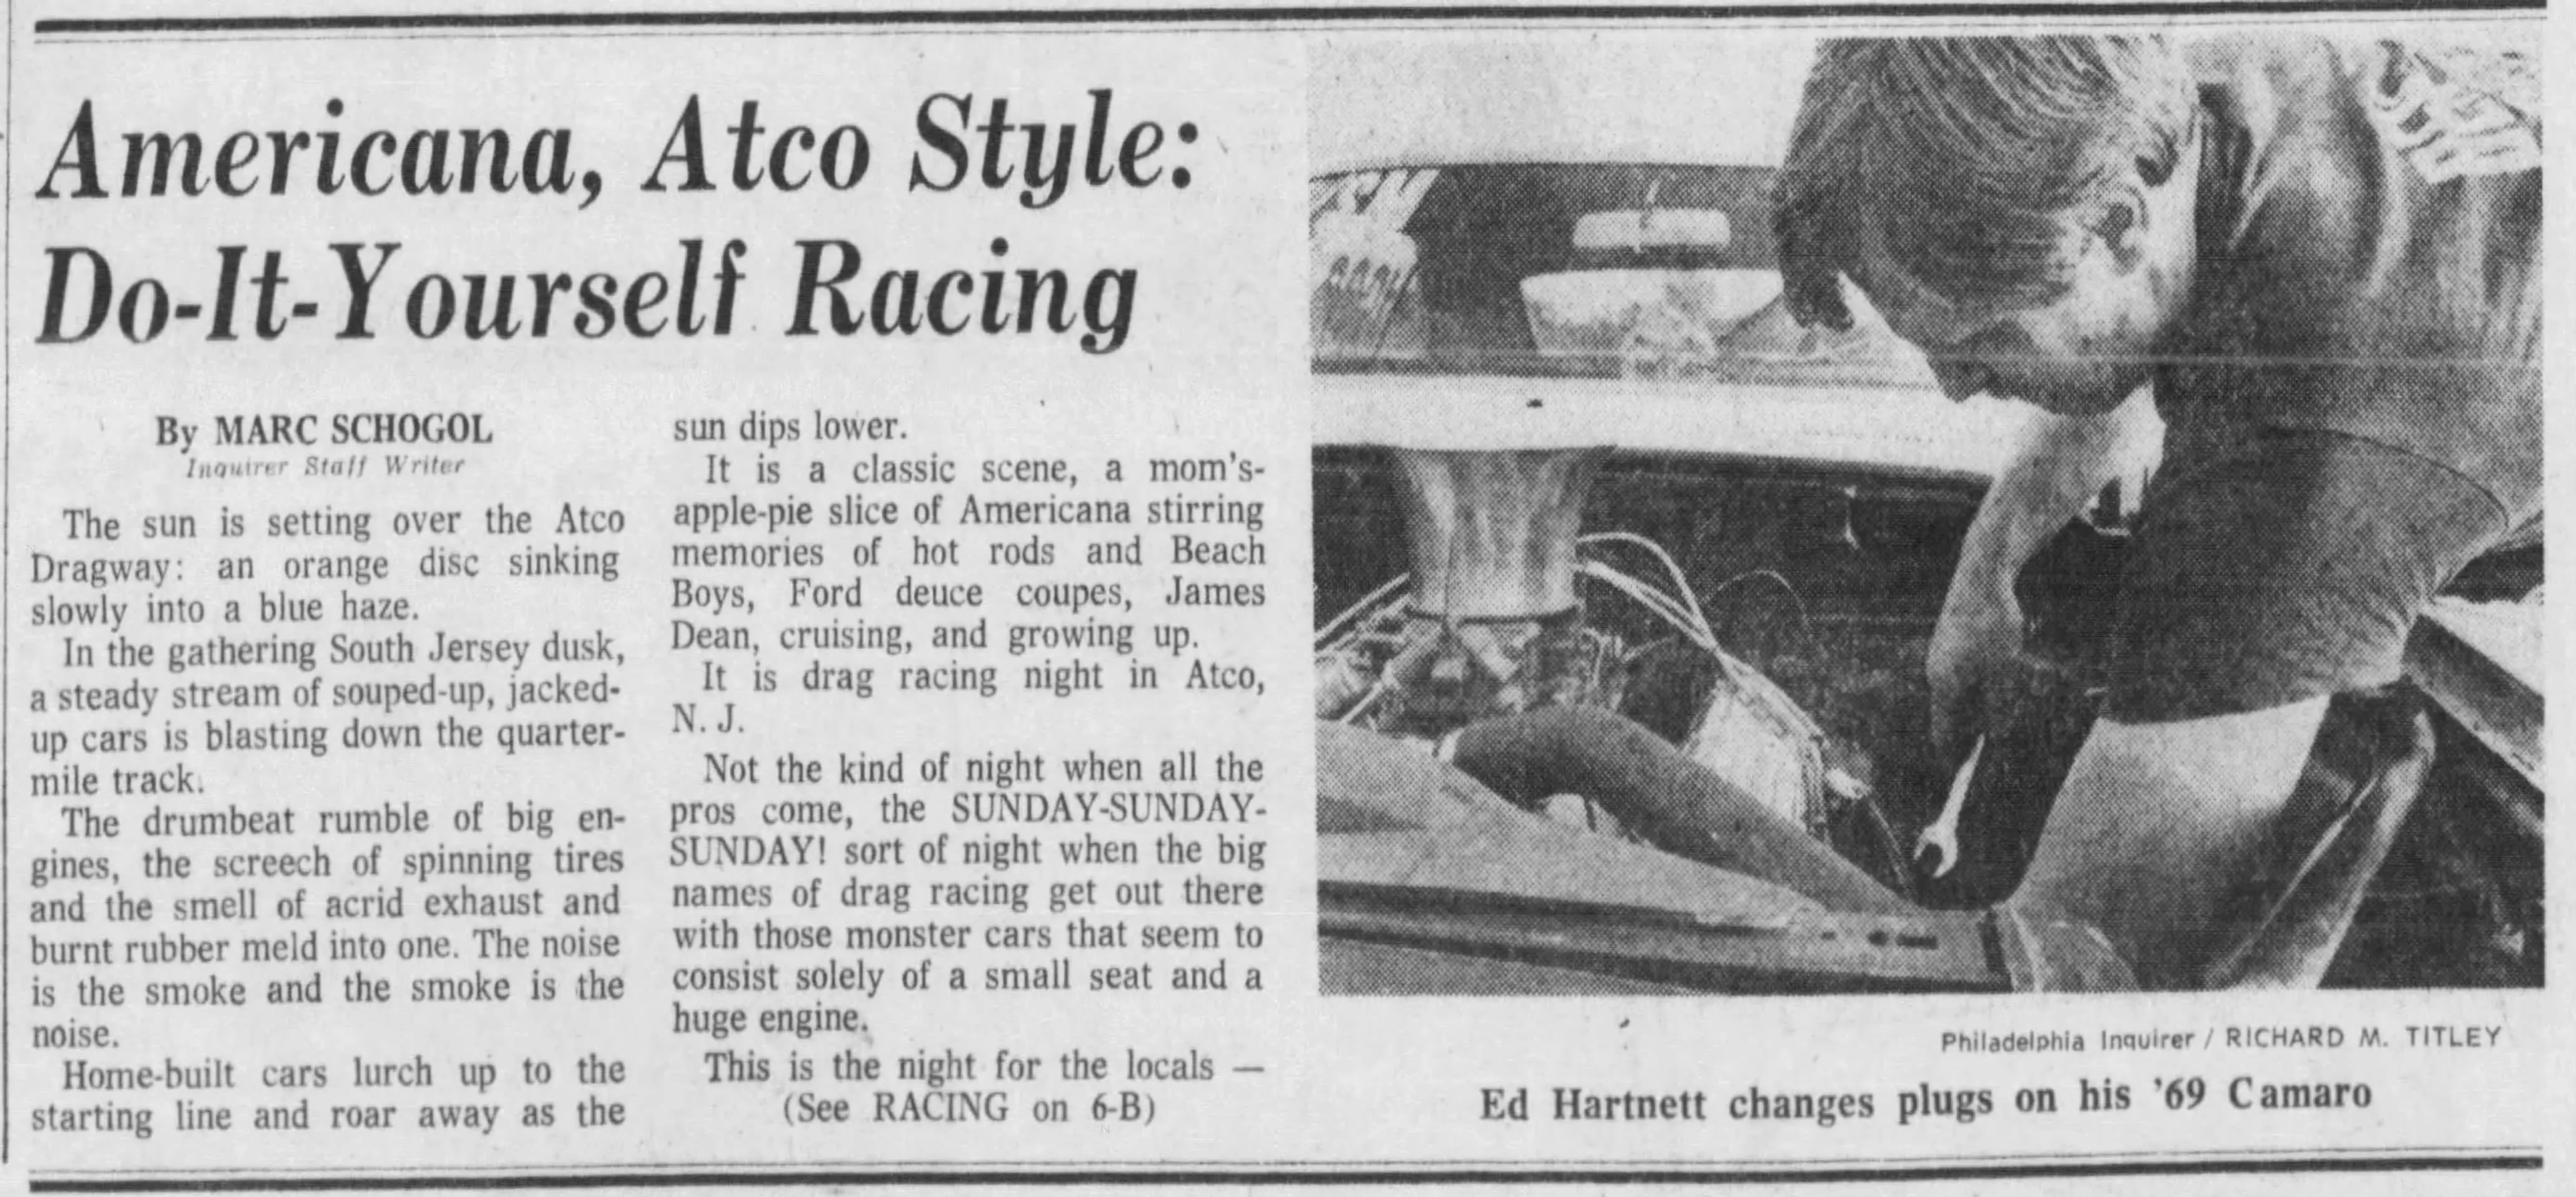 Ed Hartnett working on his 1969 Camaro, as shown in a July 6, 1975, edition of The Inquirer.